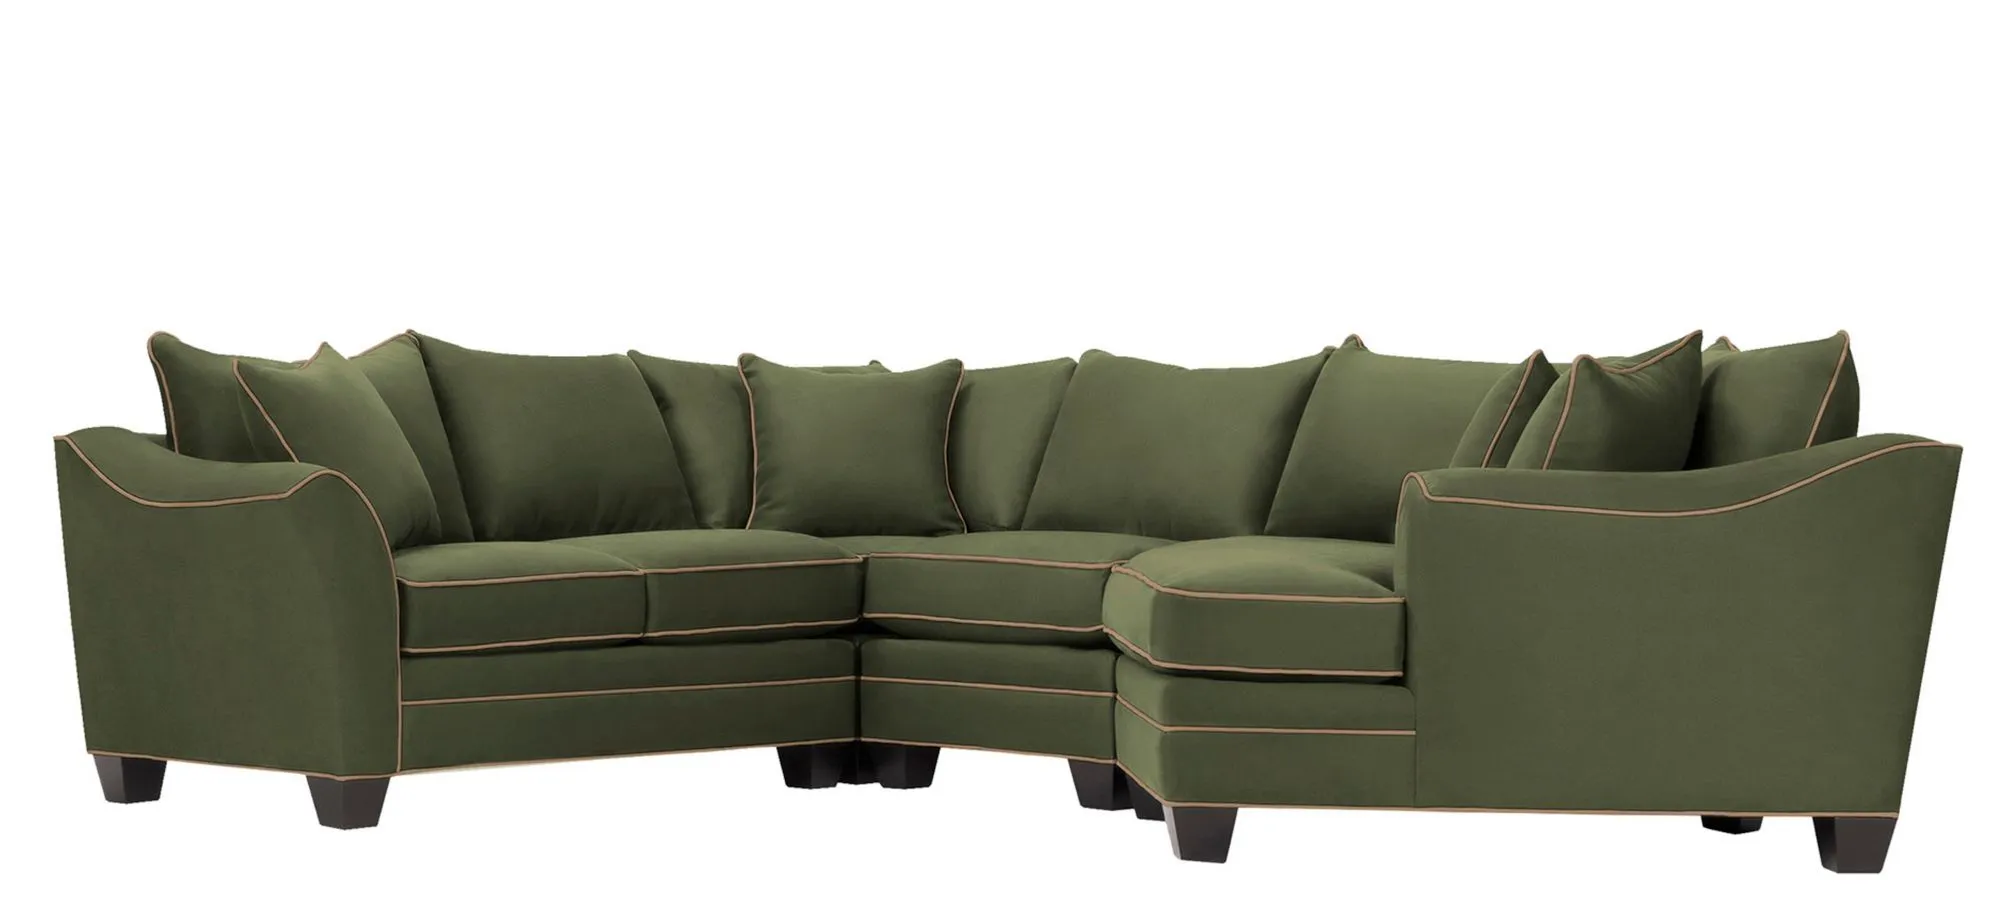 Foresthill 4-pc. Right Hand Cuddler Sectional Sofa in Suede So Soft Pine/Khaki by H.M. Richards